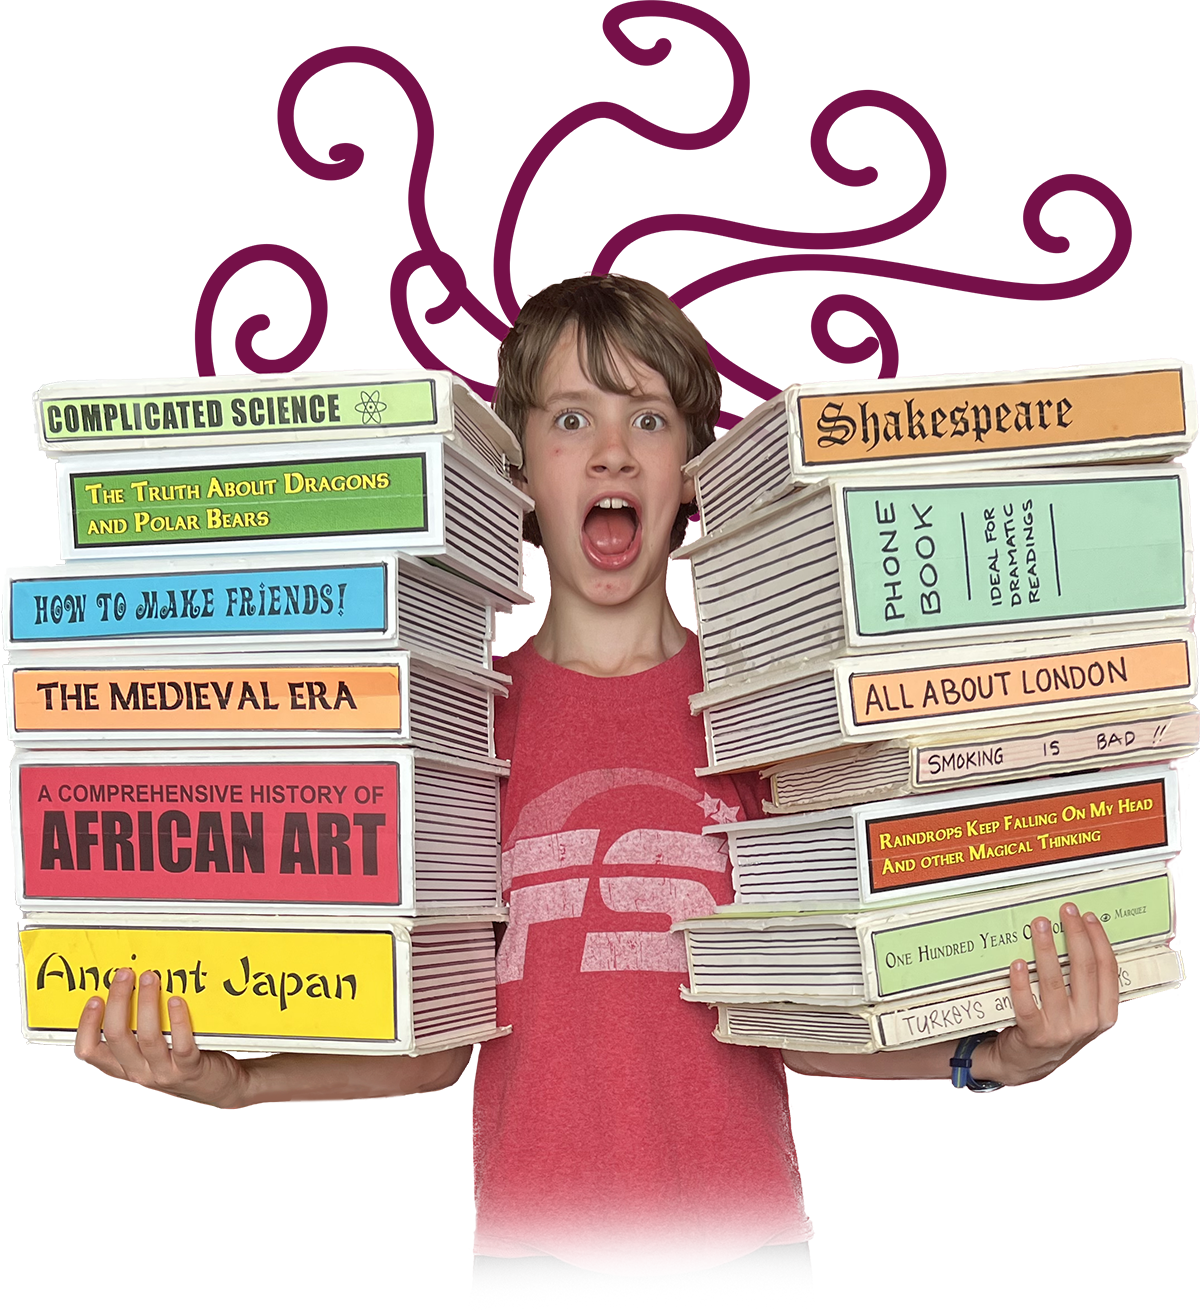 A young person holding book props in each hand